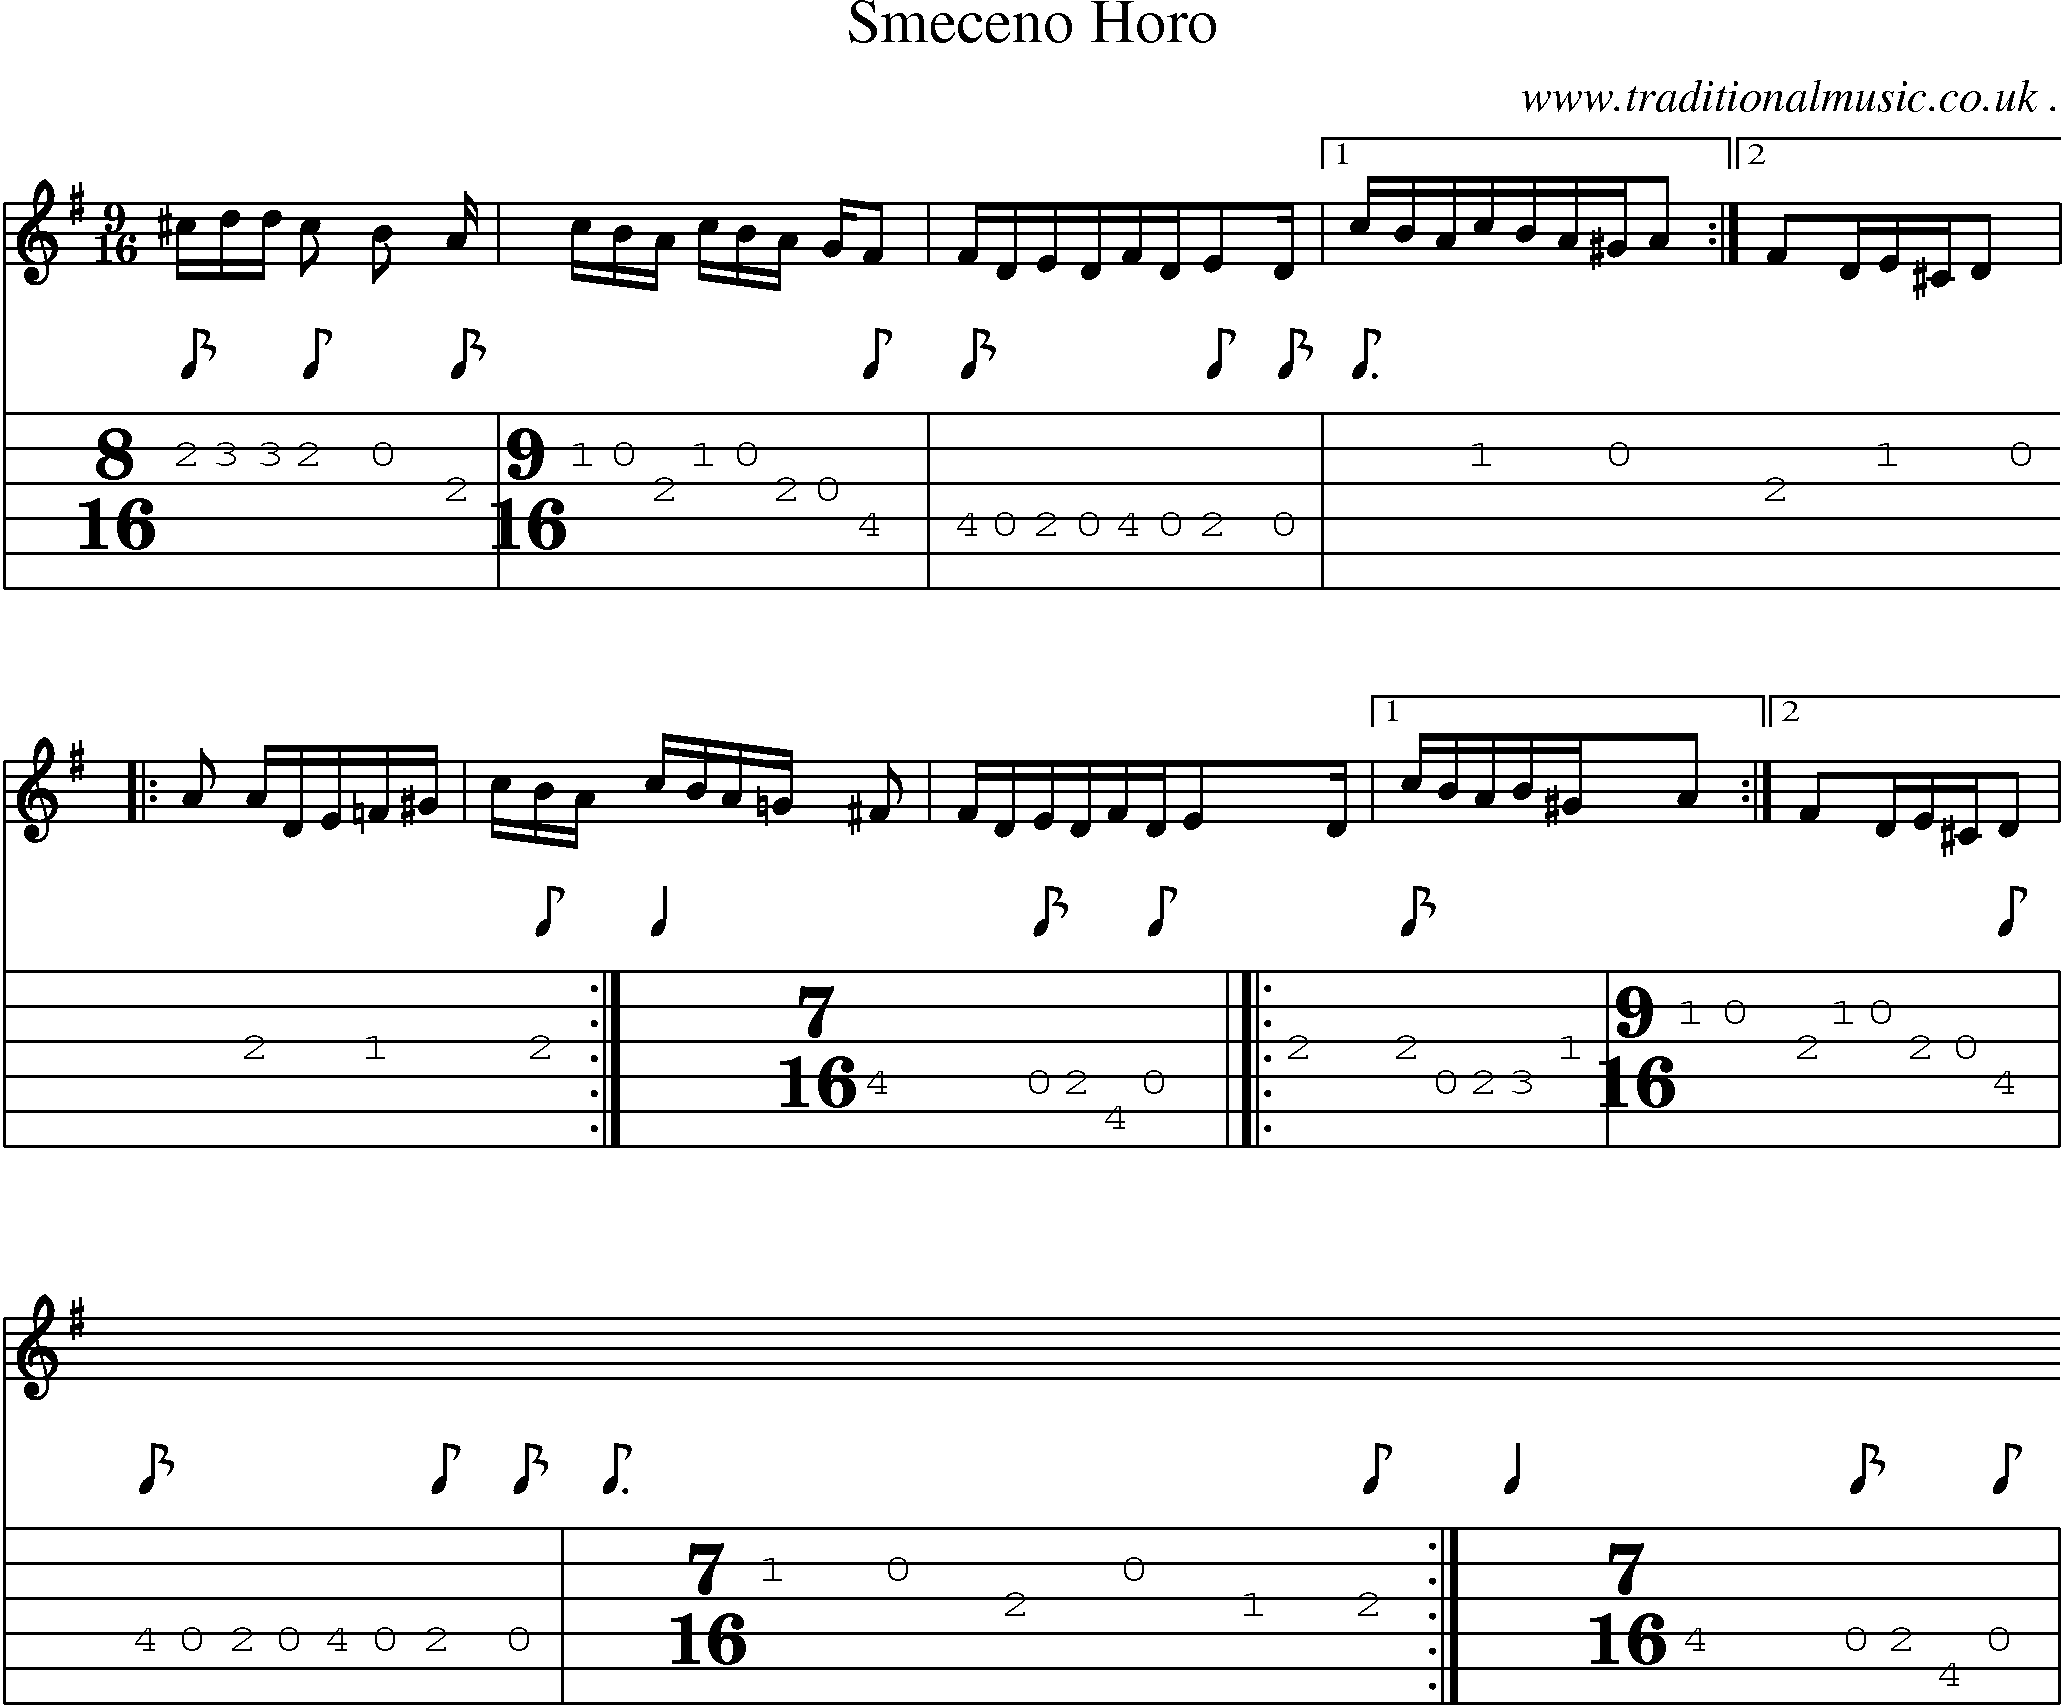 Sheet-Music and Guitar Tabs for Smeceno Horo